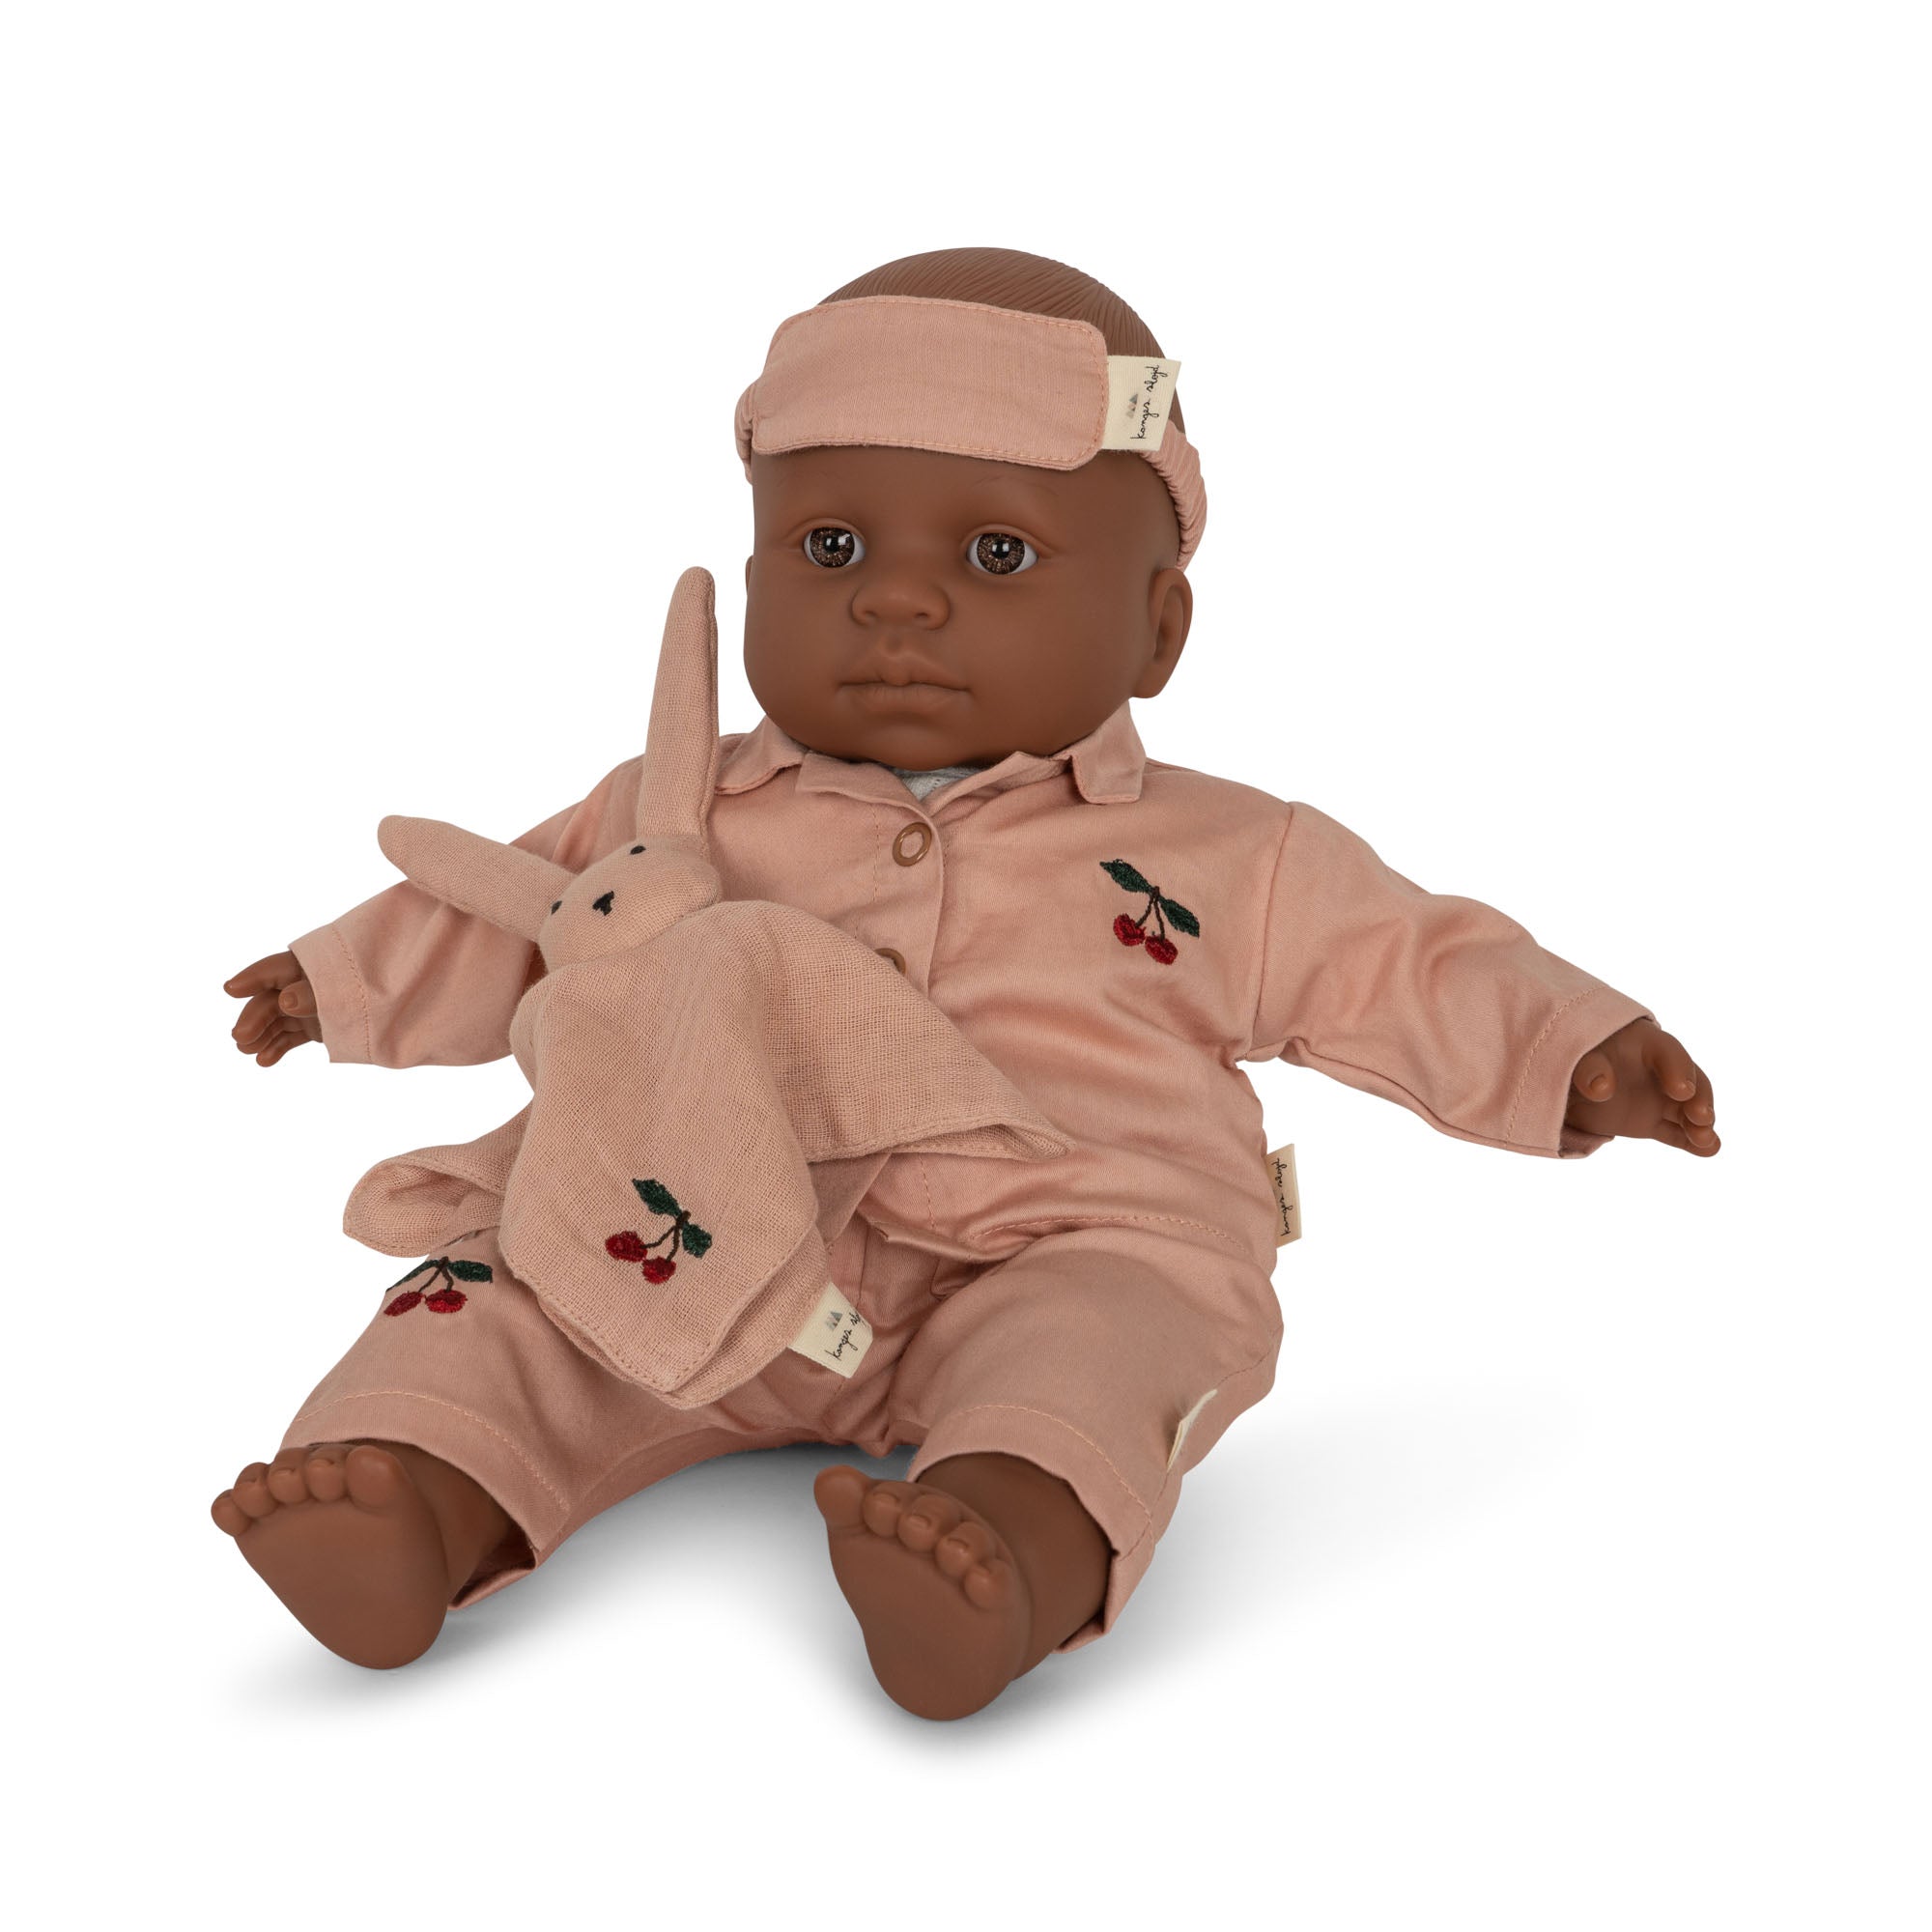 DOLL KIT: GERD GOES TO BED